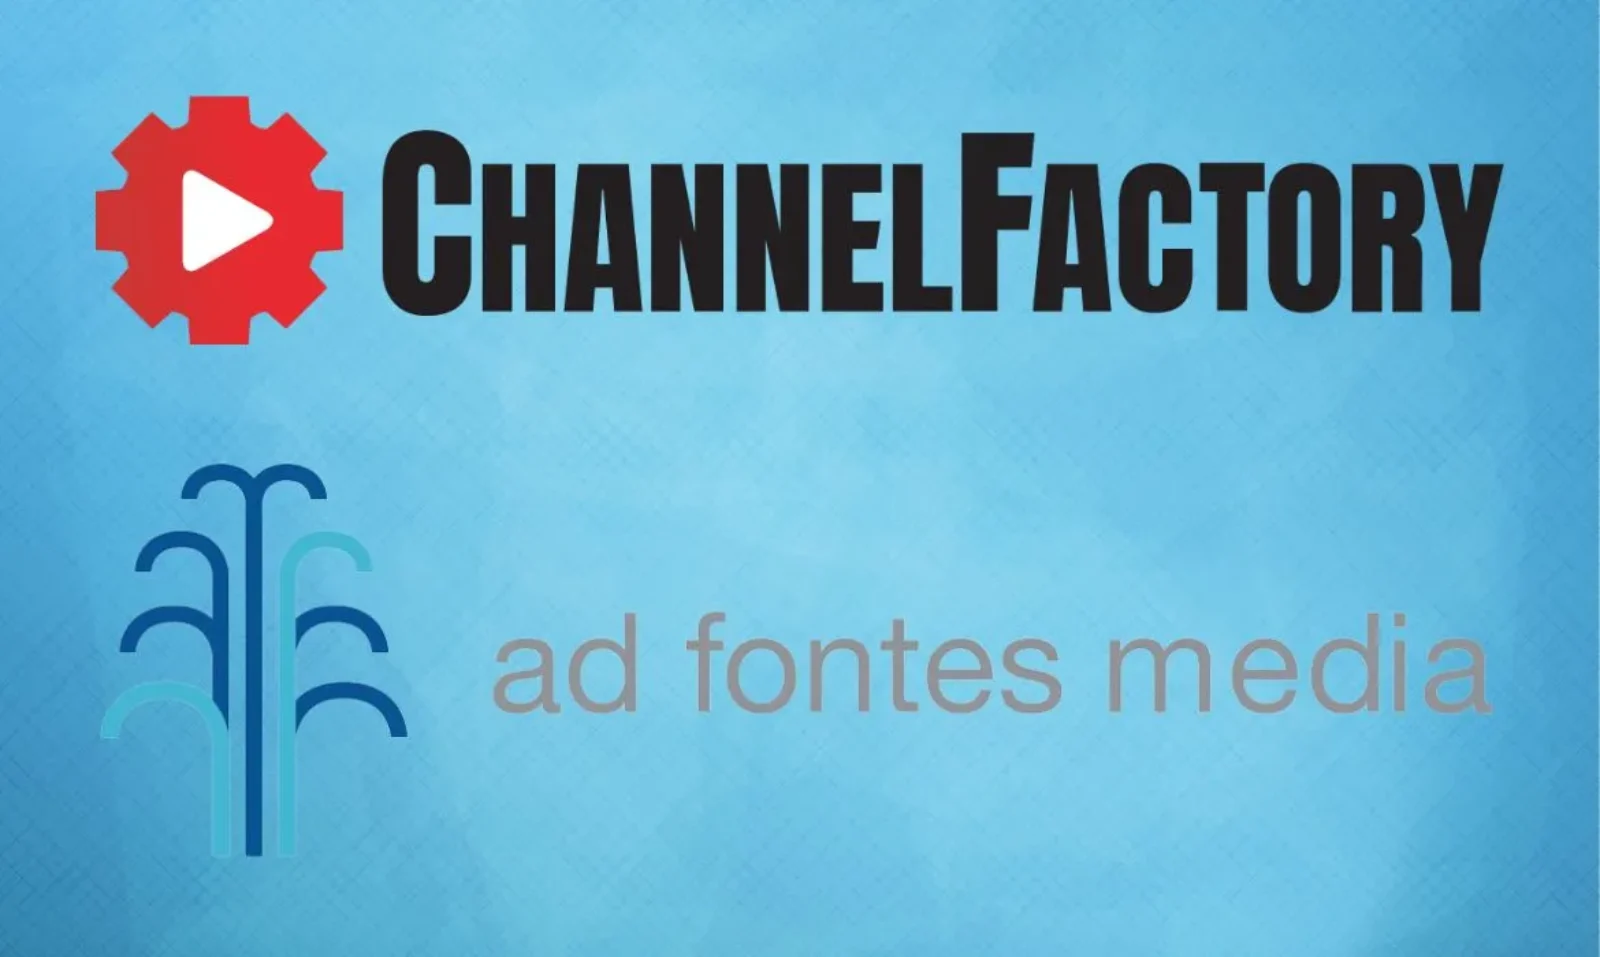 Channel Factory, Ad Fontes Media, brand suitability, contextual advertising, reliable news, digital advertising, media landscape, brand safety, political advertising, news content,